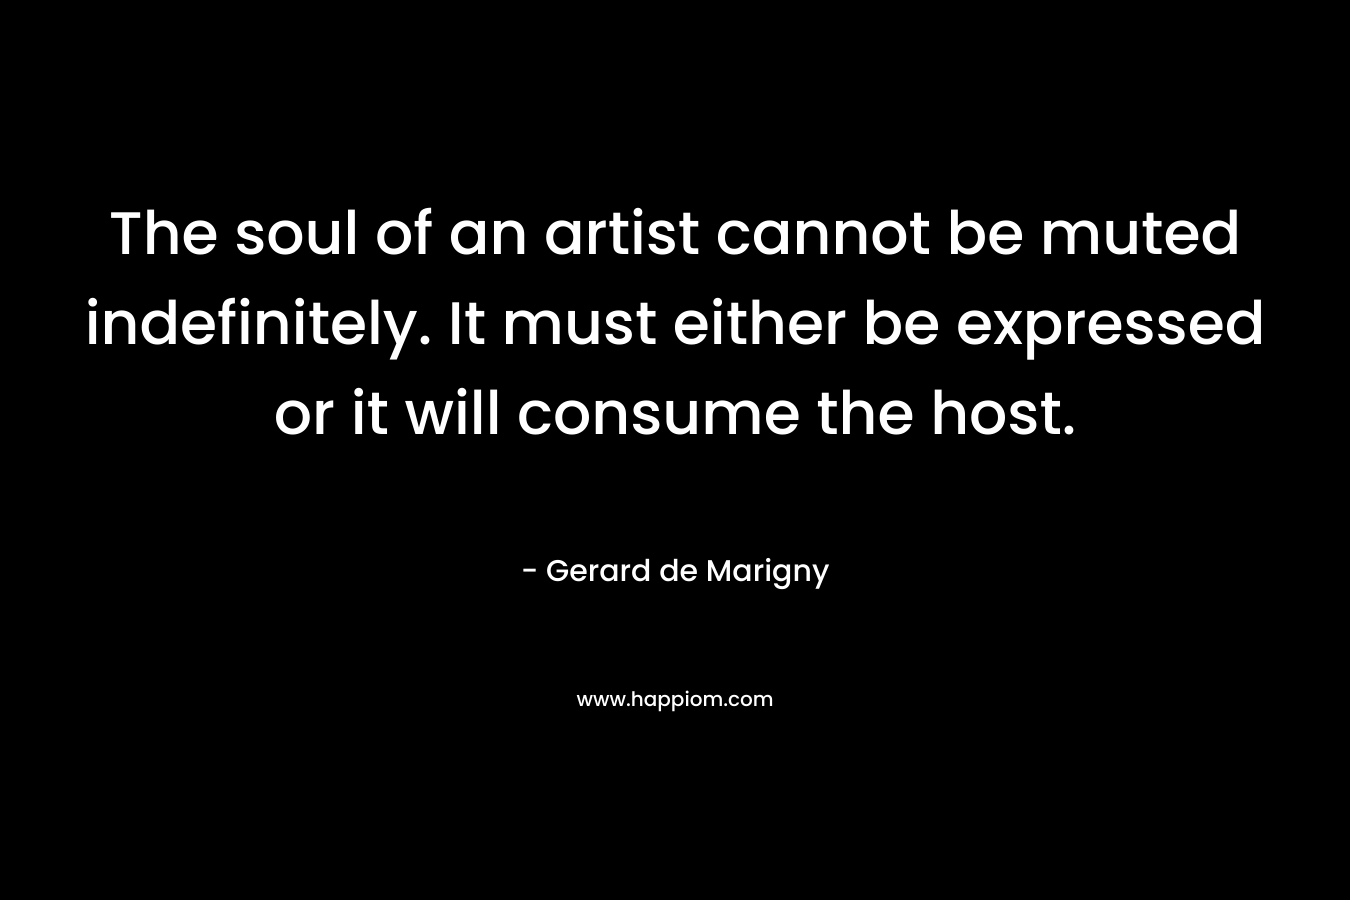 The soul of an artist cannot be muted indefinitely. It must either be expressed or it will consume the host. – Gerard de Marigny